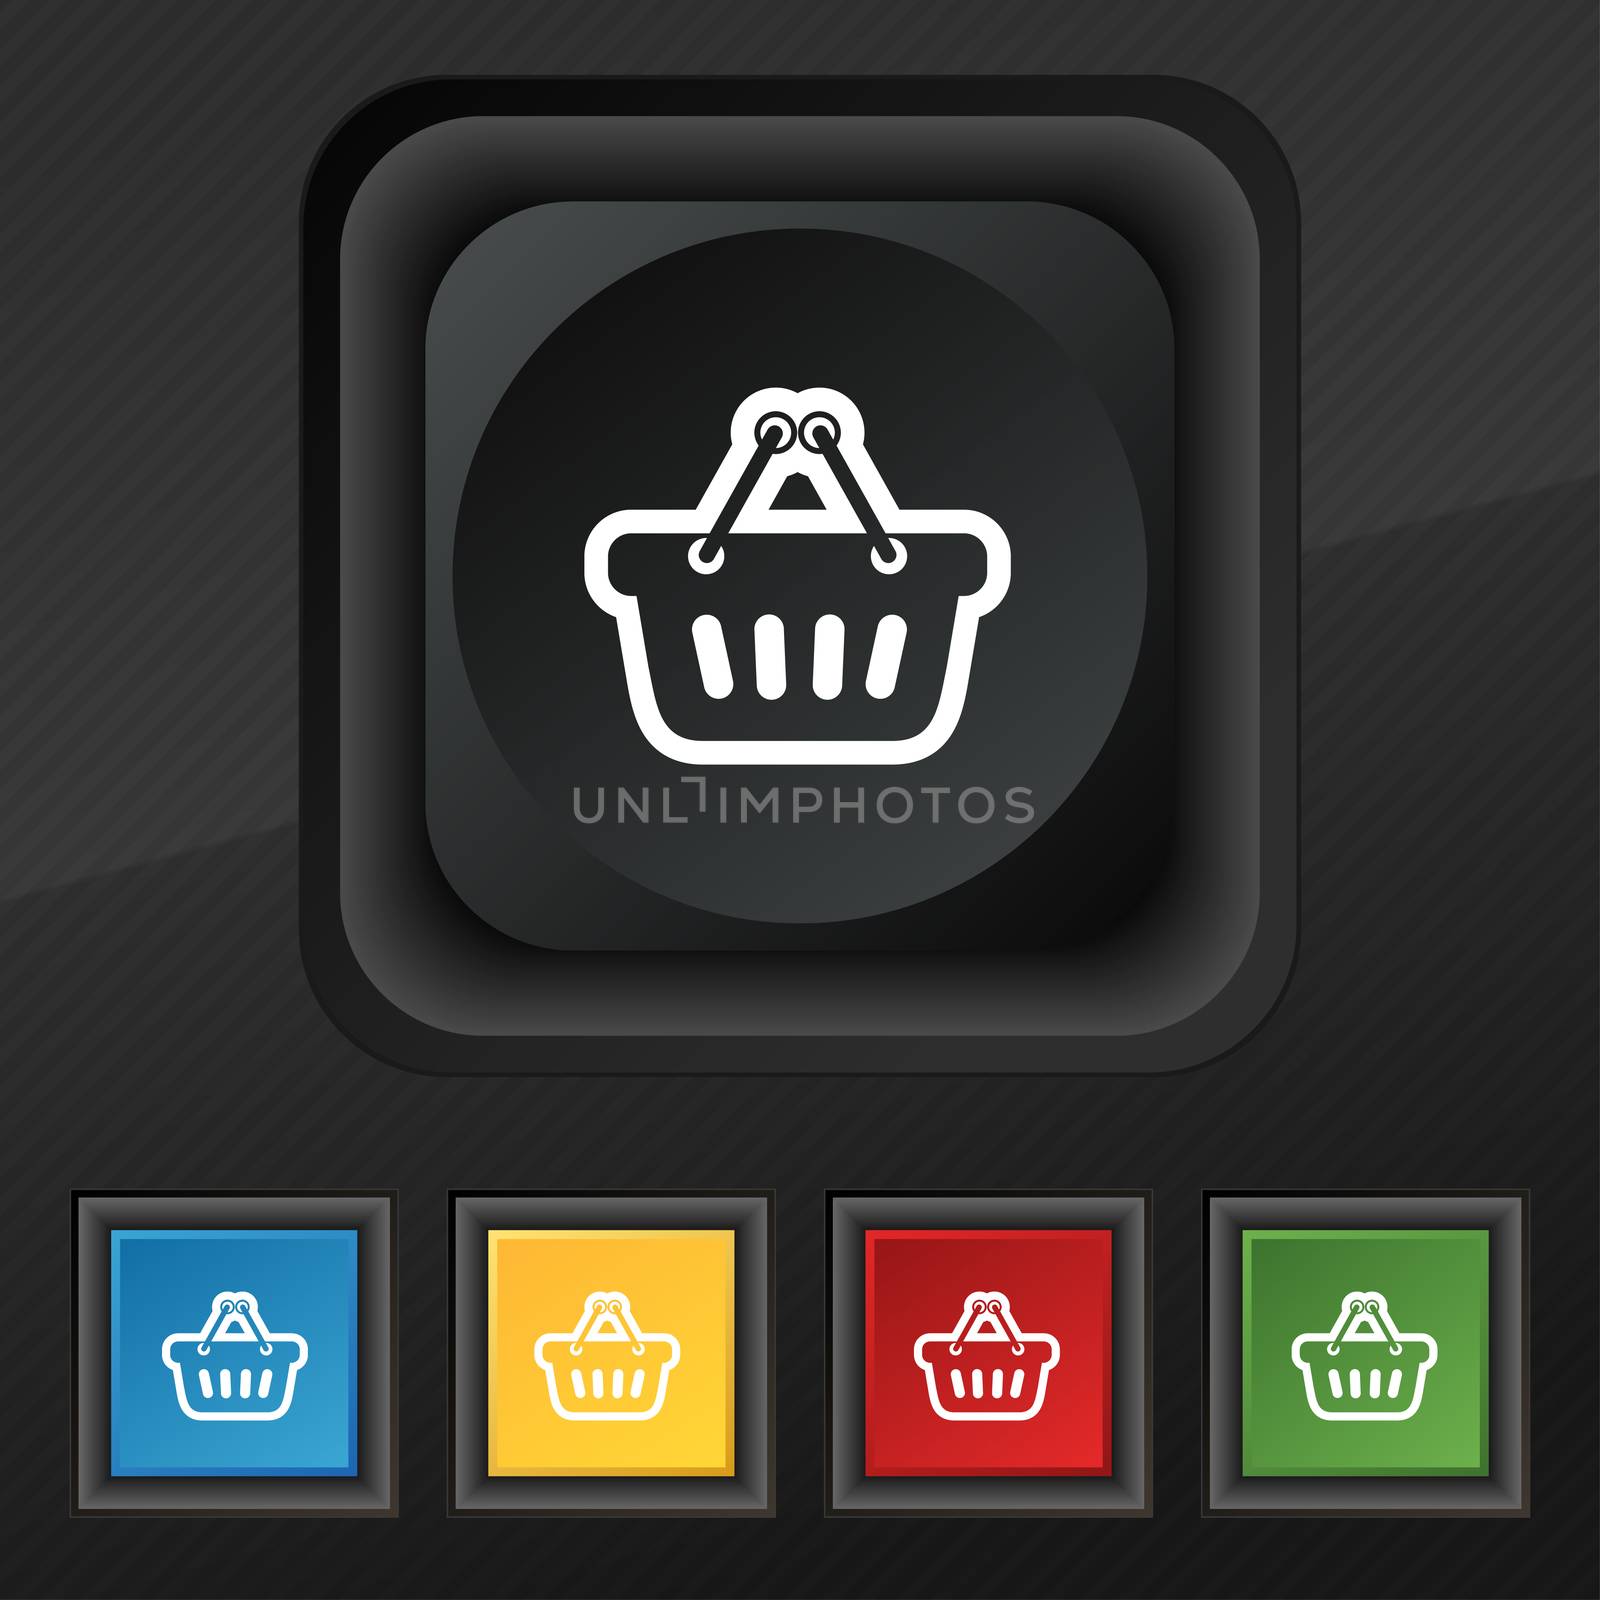 shopping cart icon symbol. Set of five colorful, stylish buttons on black texture for your design.  by serhii_lohvyniuk